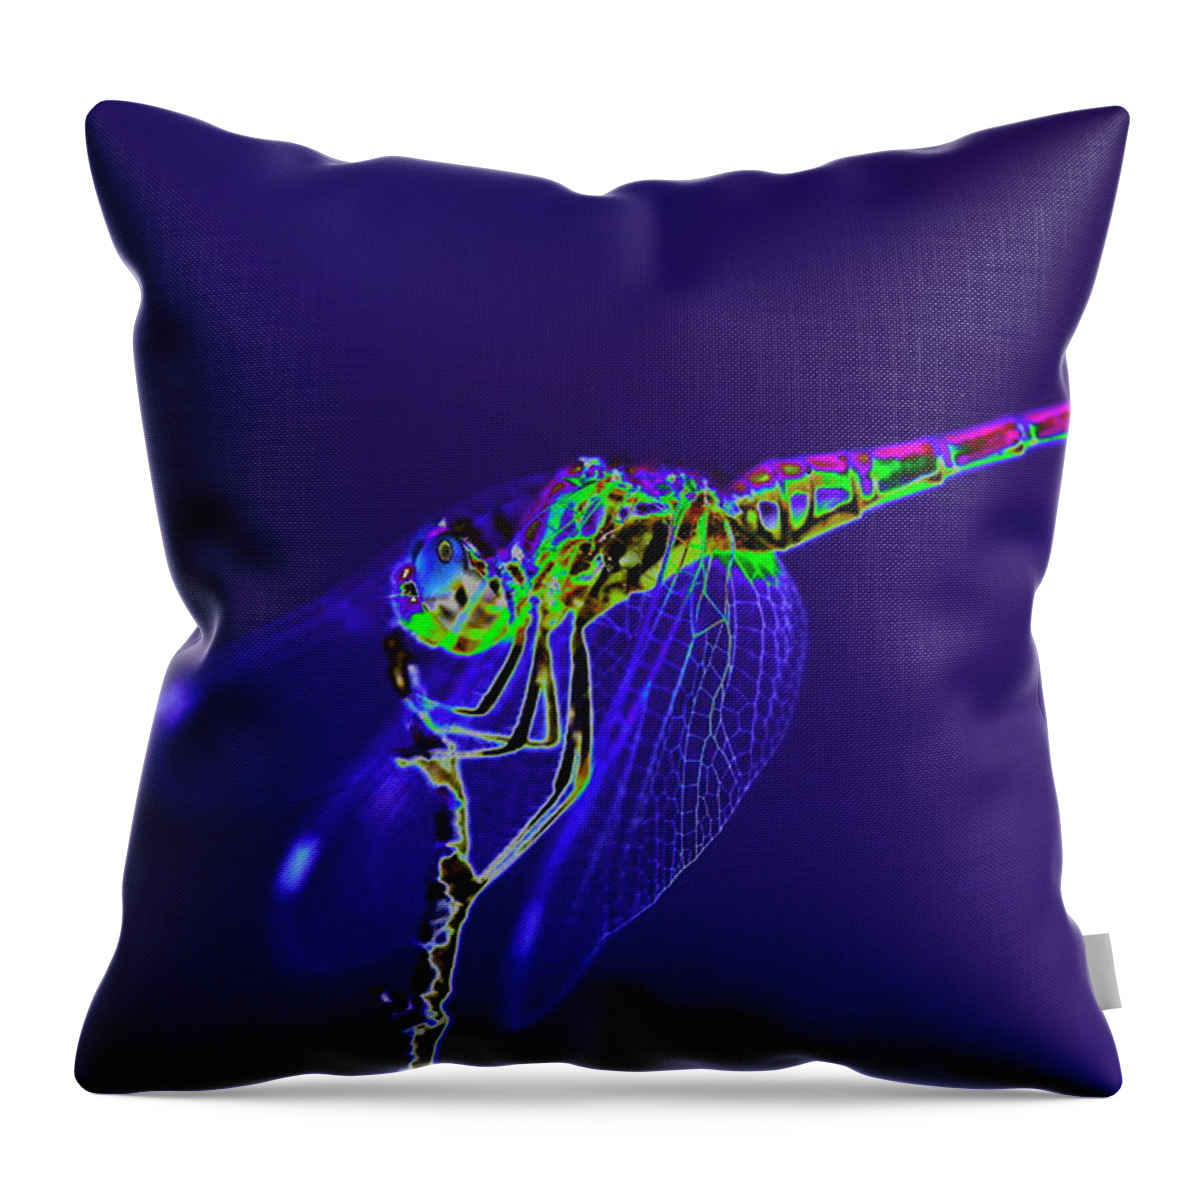  Pop Art Throw Pillow featuring the photograph Bioluminescent Dragonfly by Richard Patmore